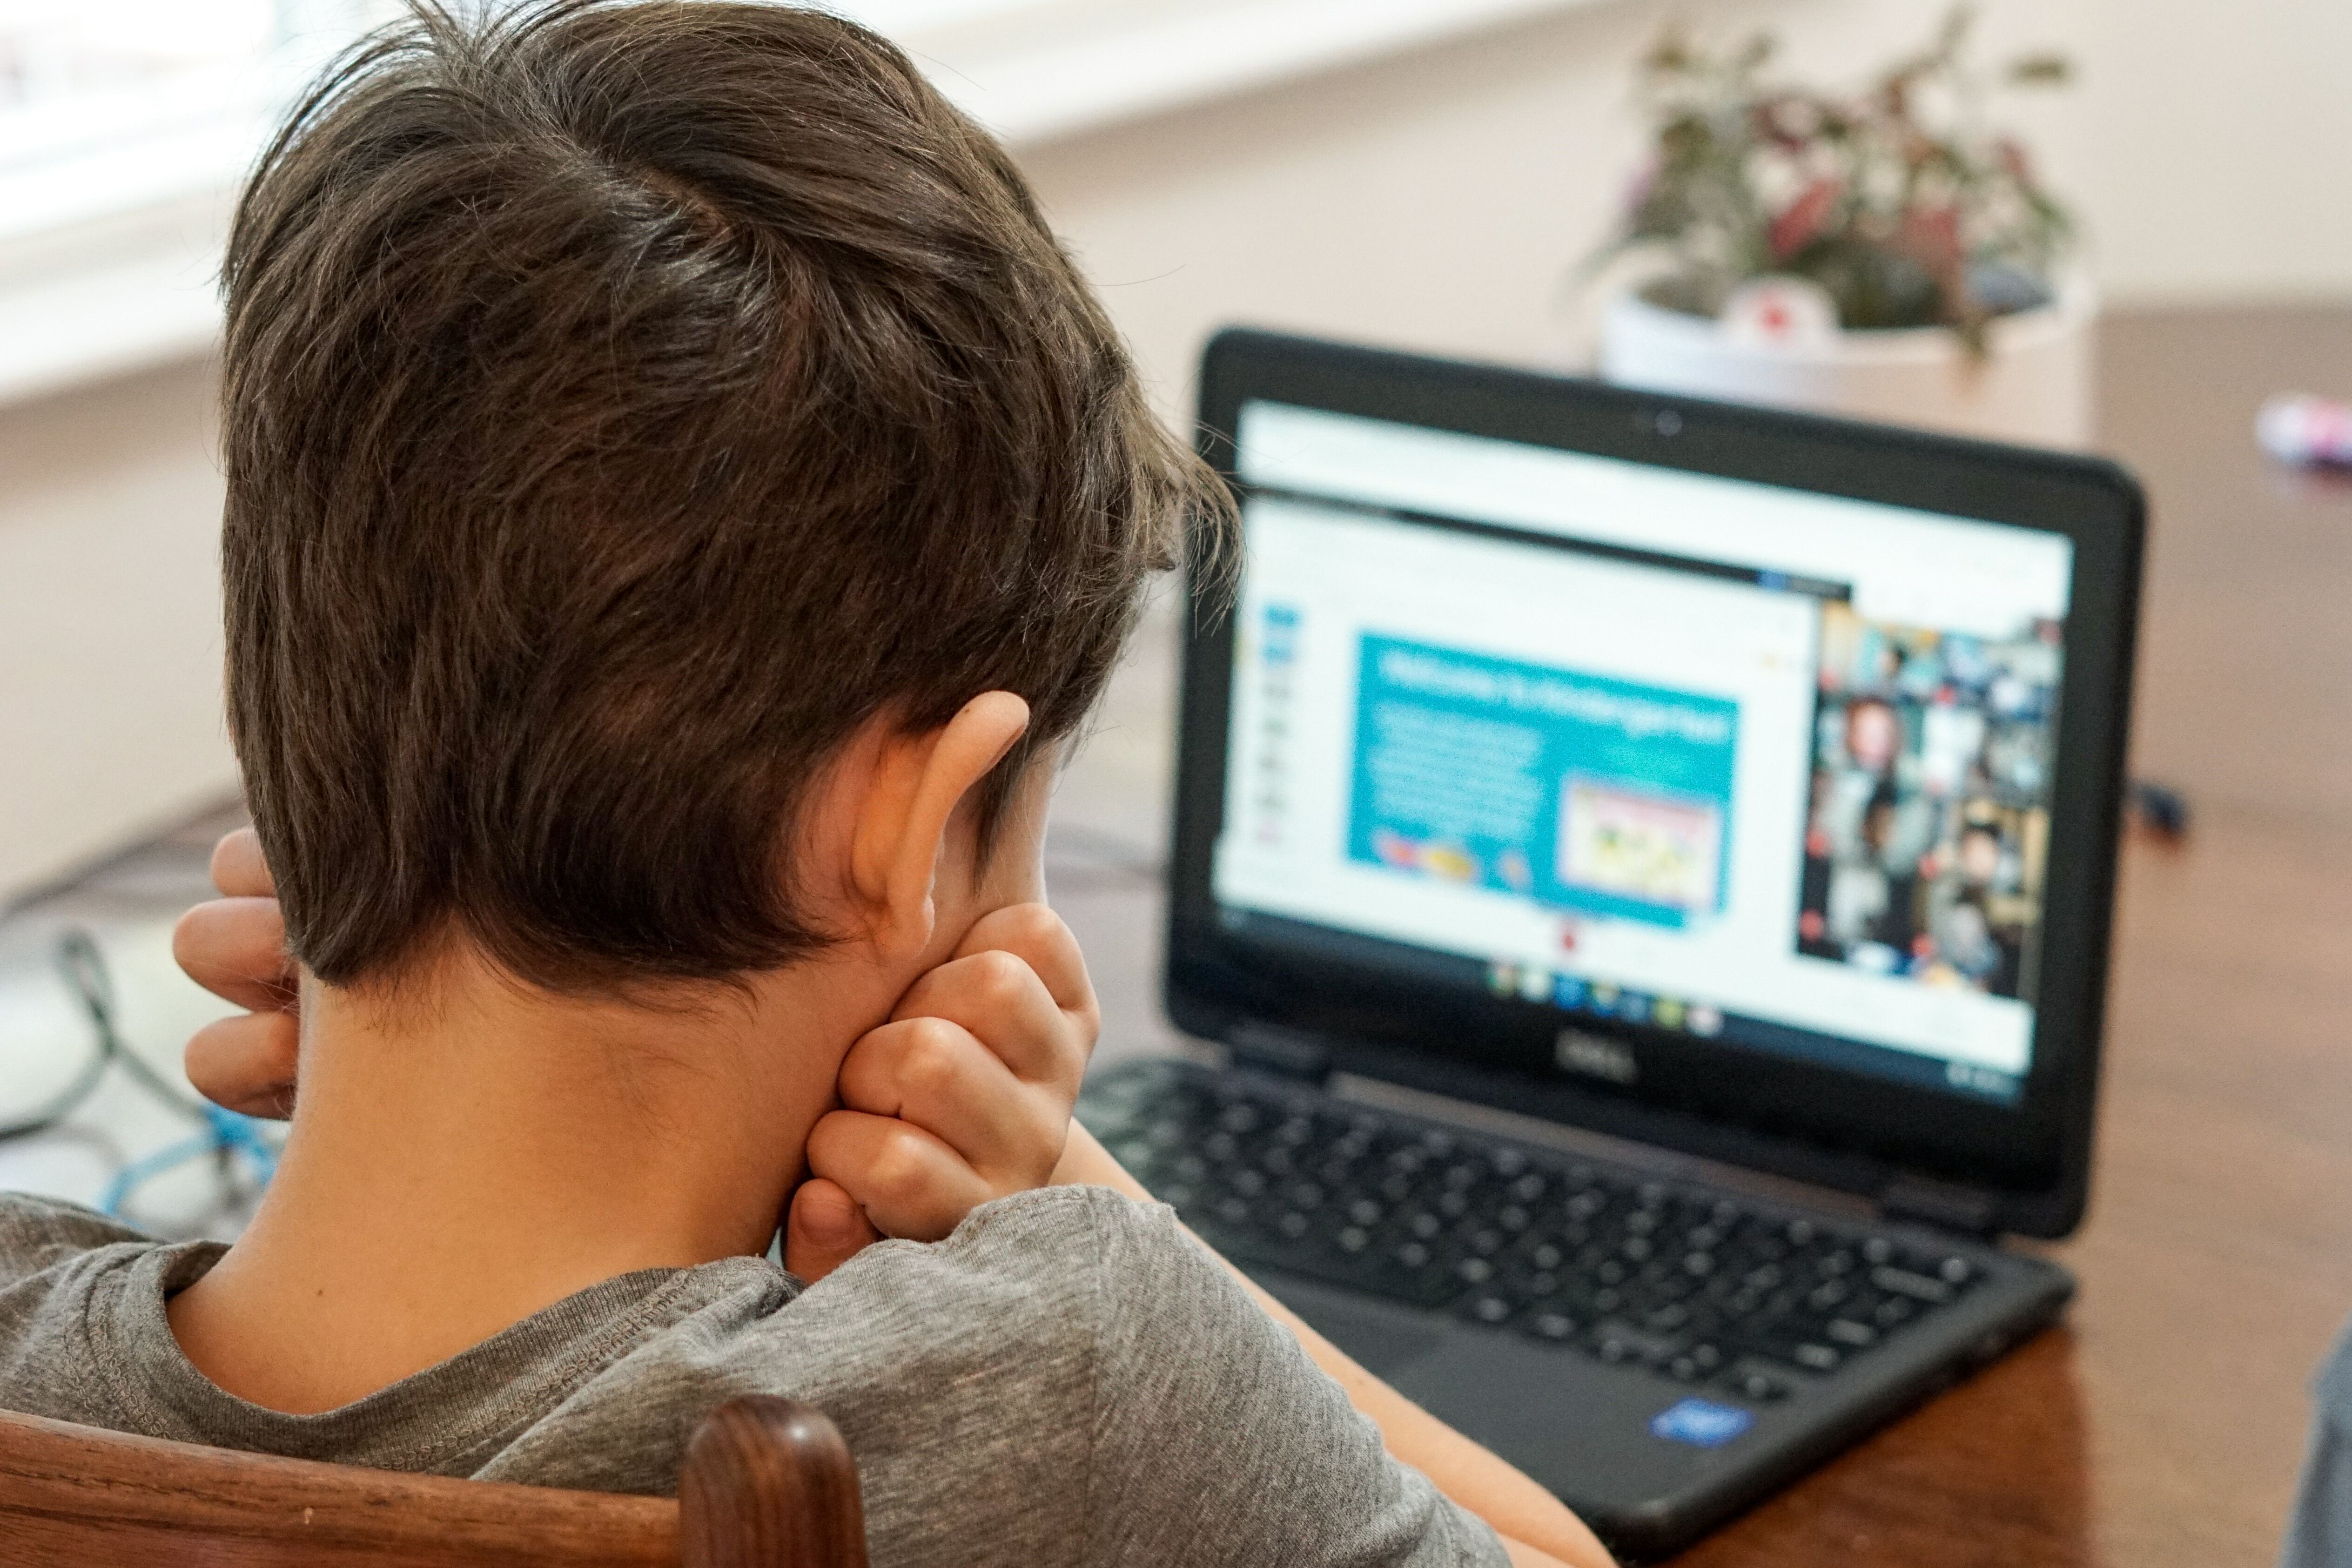 A child staring at a laptop screen